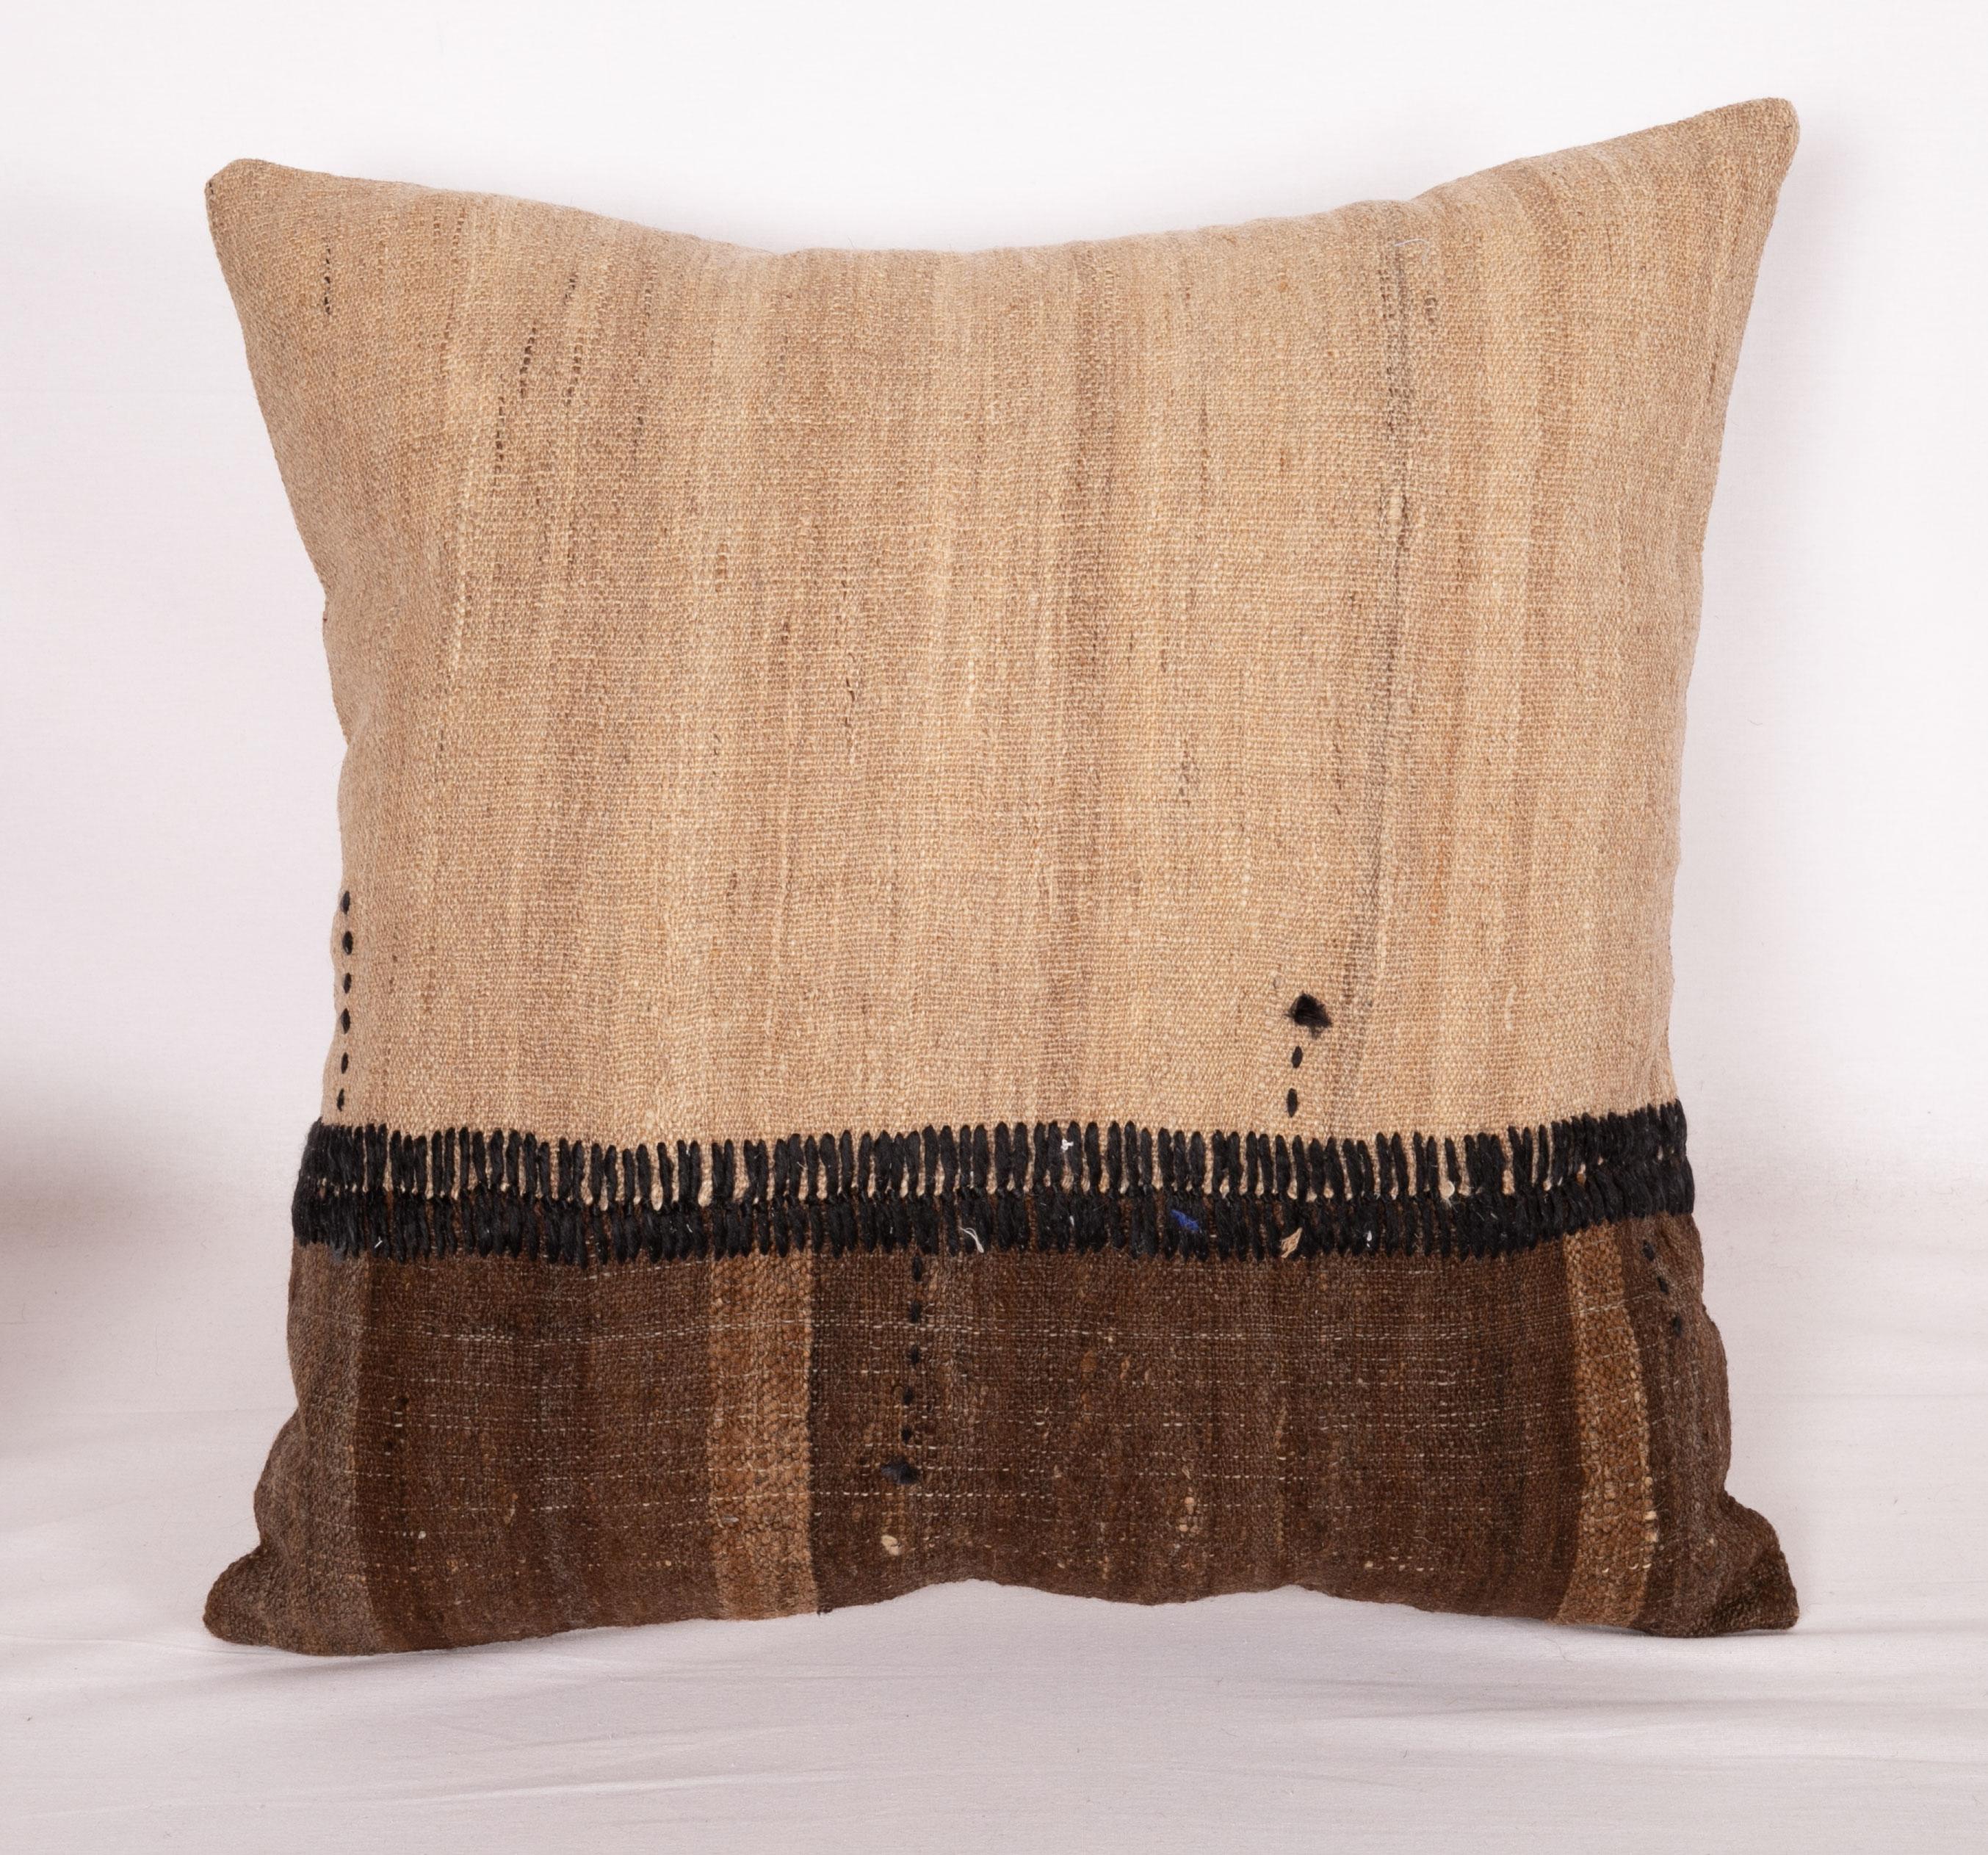 Hand-Woven Neutral Pillowcases Made from an Anatolian Vintage Cover, Mid-20th Century